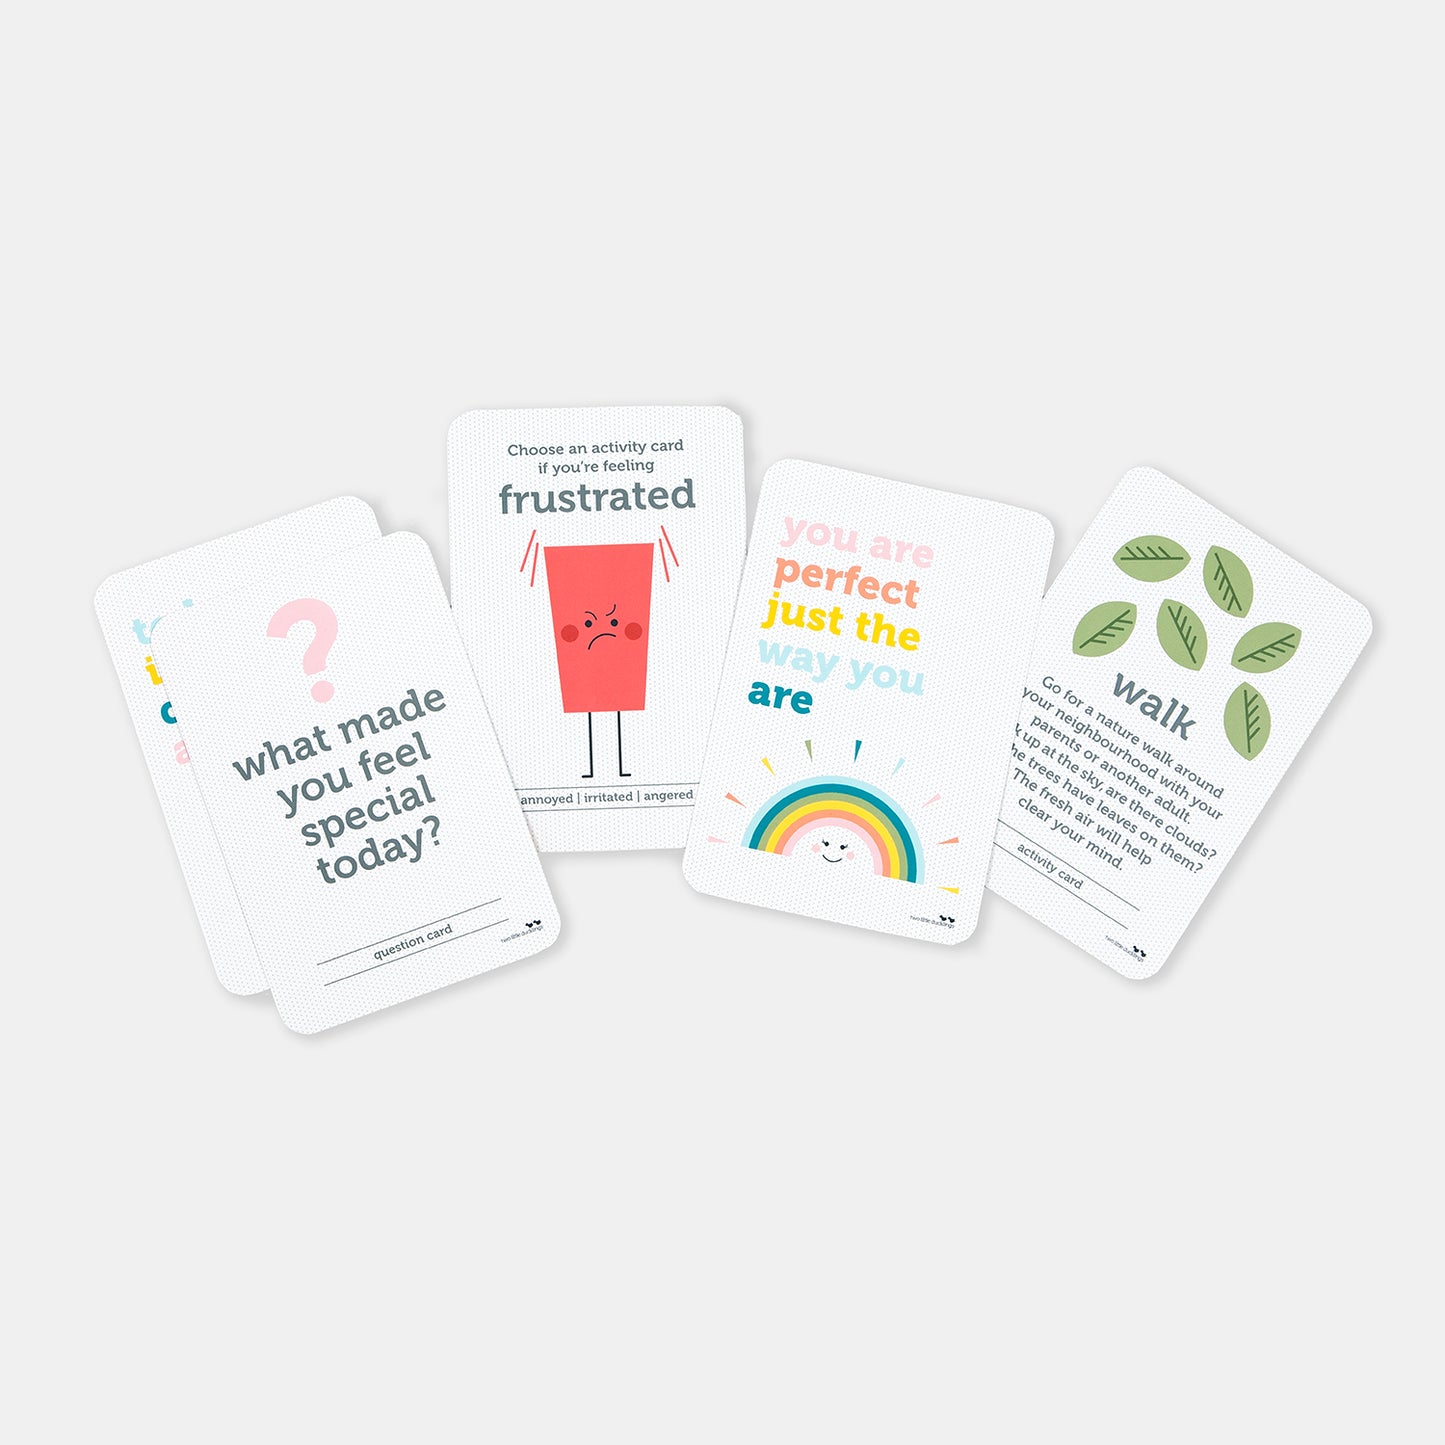 Kids’ Wellbeing and Affirmation Cards